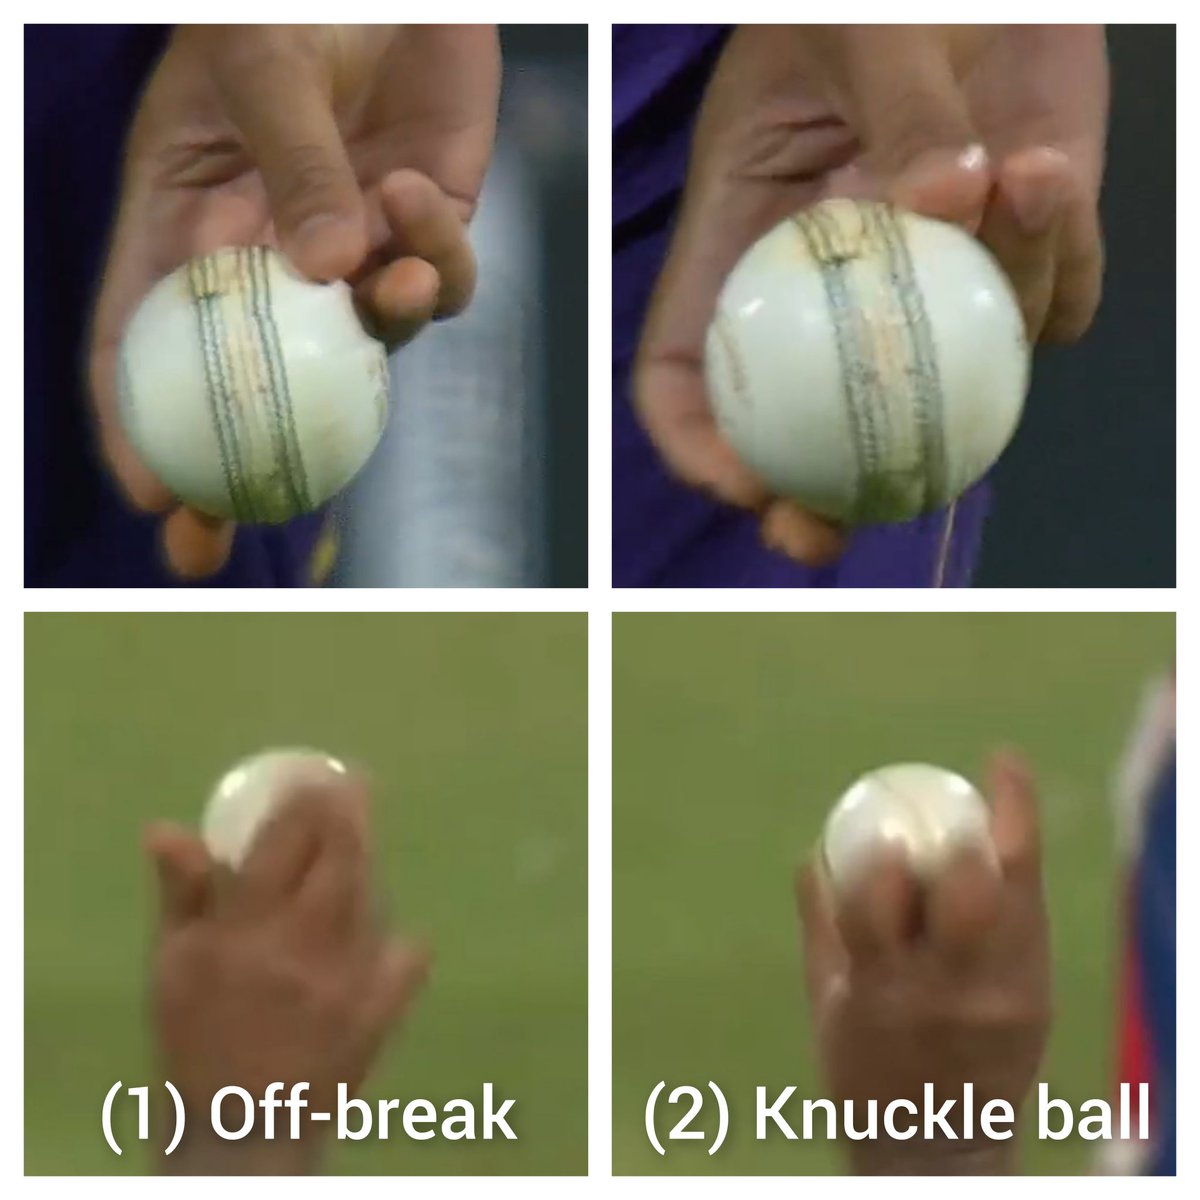 Sunil Narine's main variations - Off break (1) and Knuckle ball (2).

Off break spins right. Ball is deeper in his hand and spin is imparted using fingers and wrist.

Knuckle ball turns left. Ball is held with knuckles and flicked out using index and middlefinger.

SUBTLE CHANGE